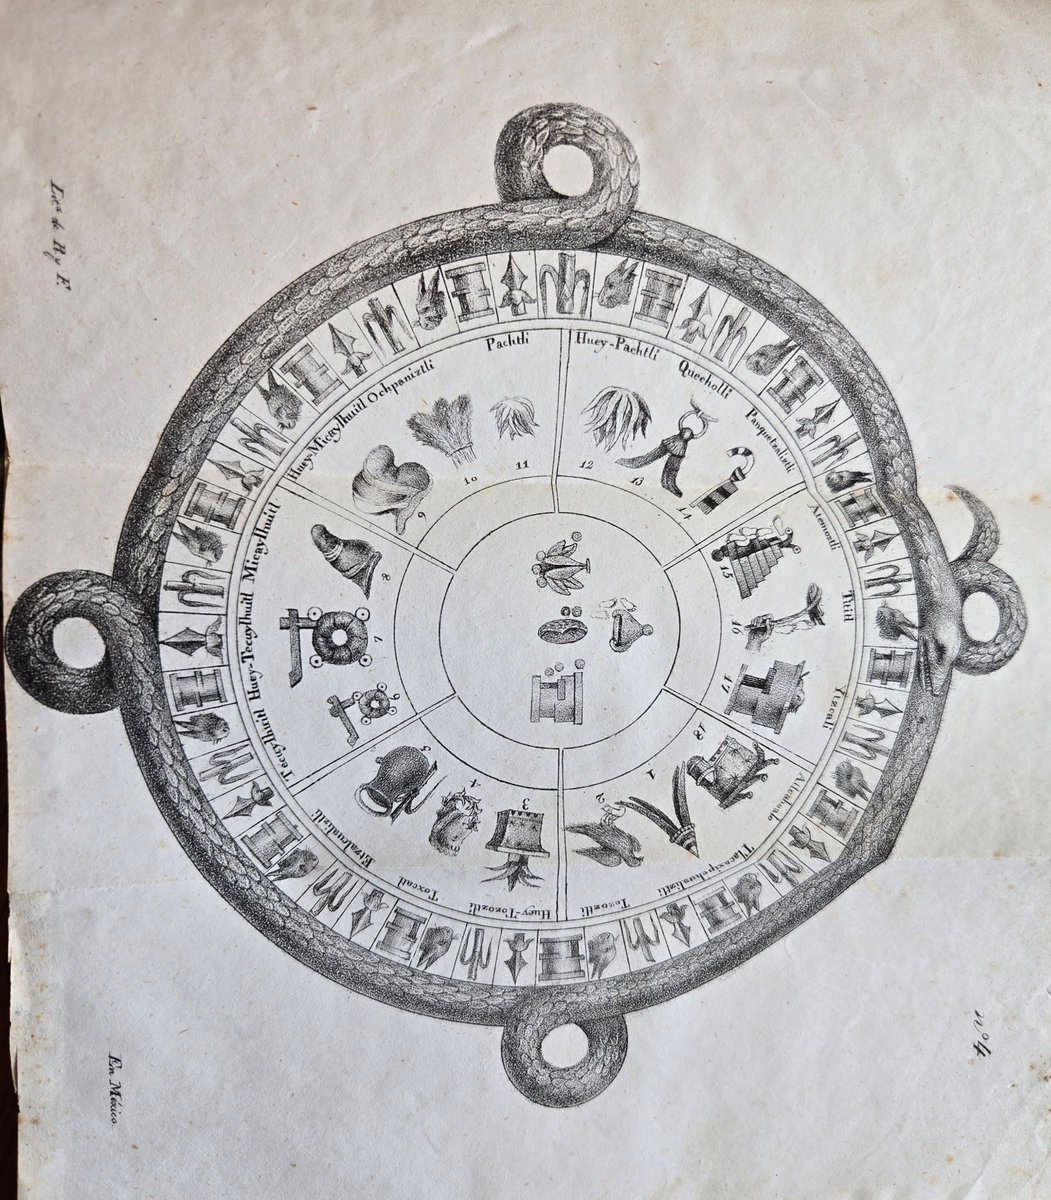 We found this Aztec Calendar and Cycle of Festivals in our collection. Divided into 18 months, this solar calendar had each month consisting of 20 days. Every month was dedicated to a specific god, with a ceremony held in their honor. #azteccalendar #mexico #aztec #history